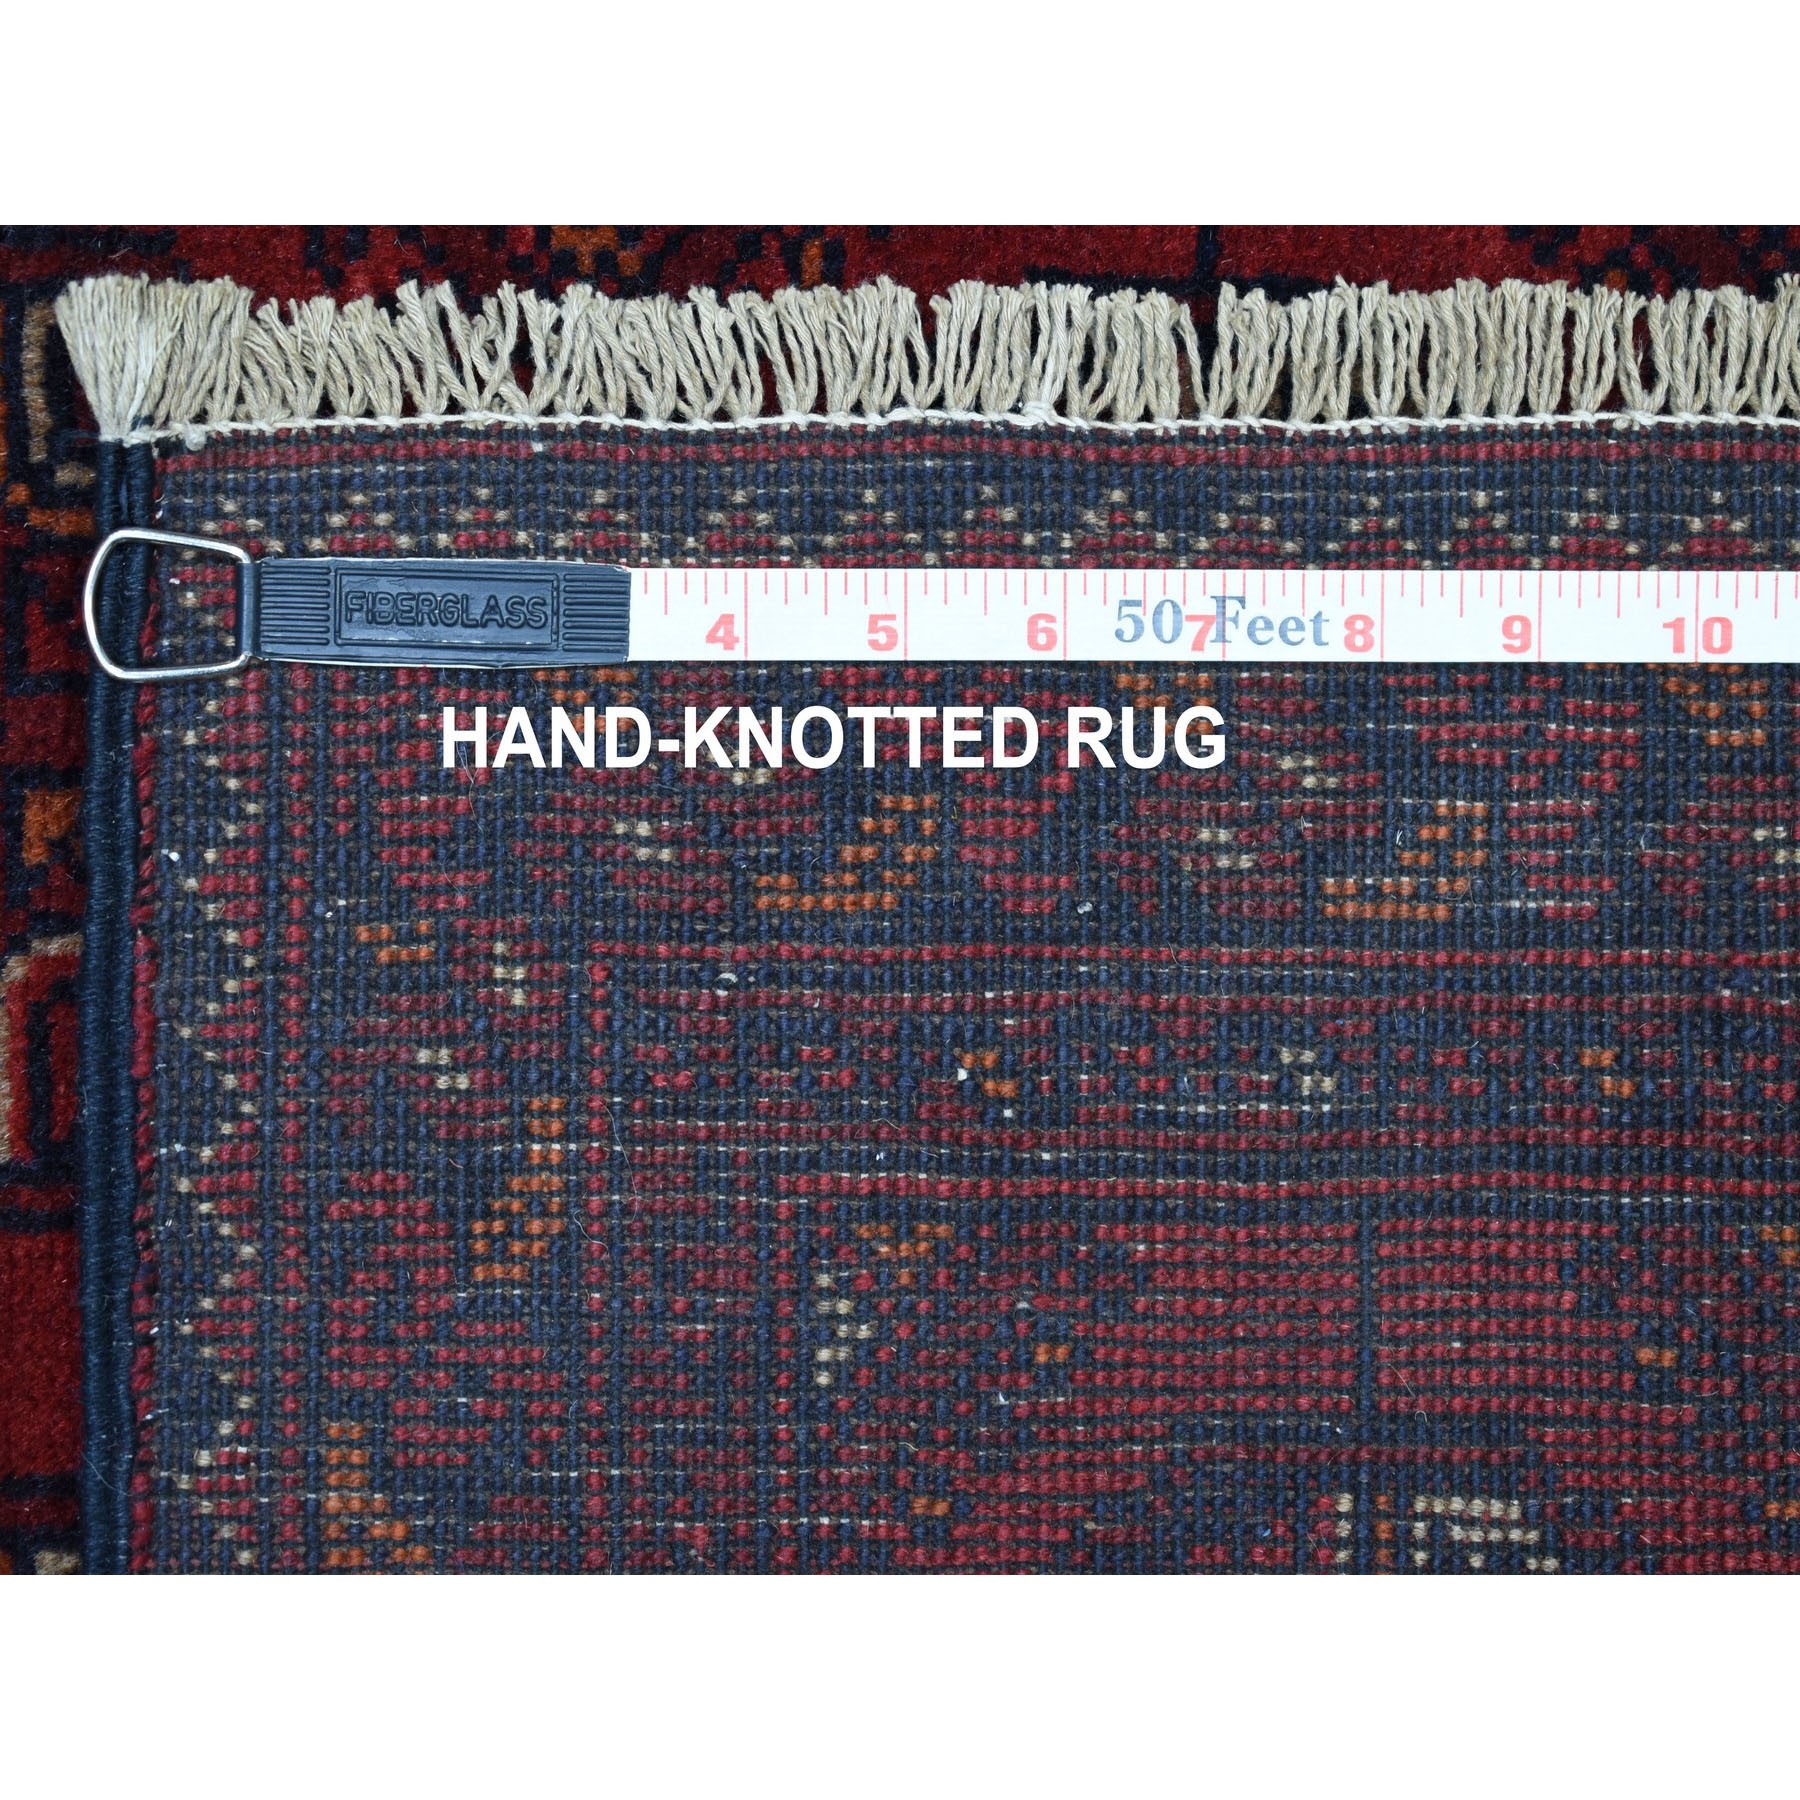 2-6 x4- Deep and Saturated Red Elephant Feet Afghan Andkhoy Pure Wool Hand Knotted Oriental Rug 